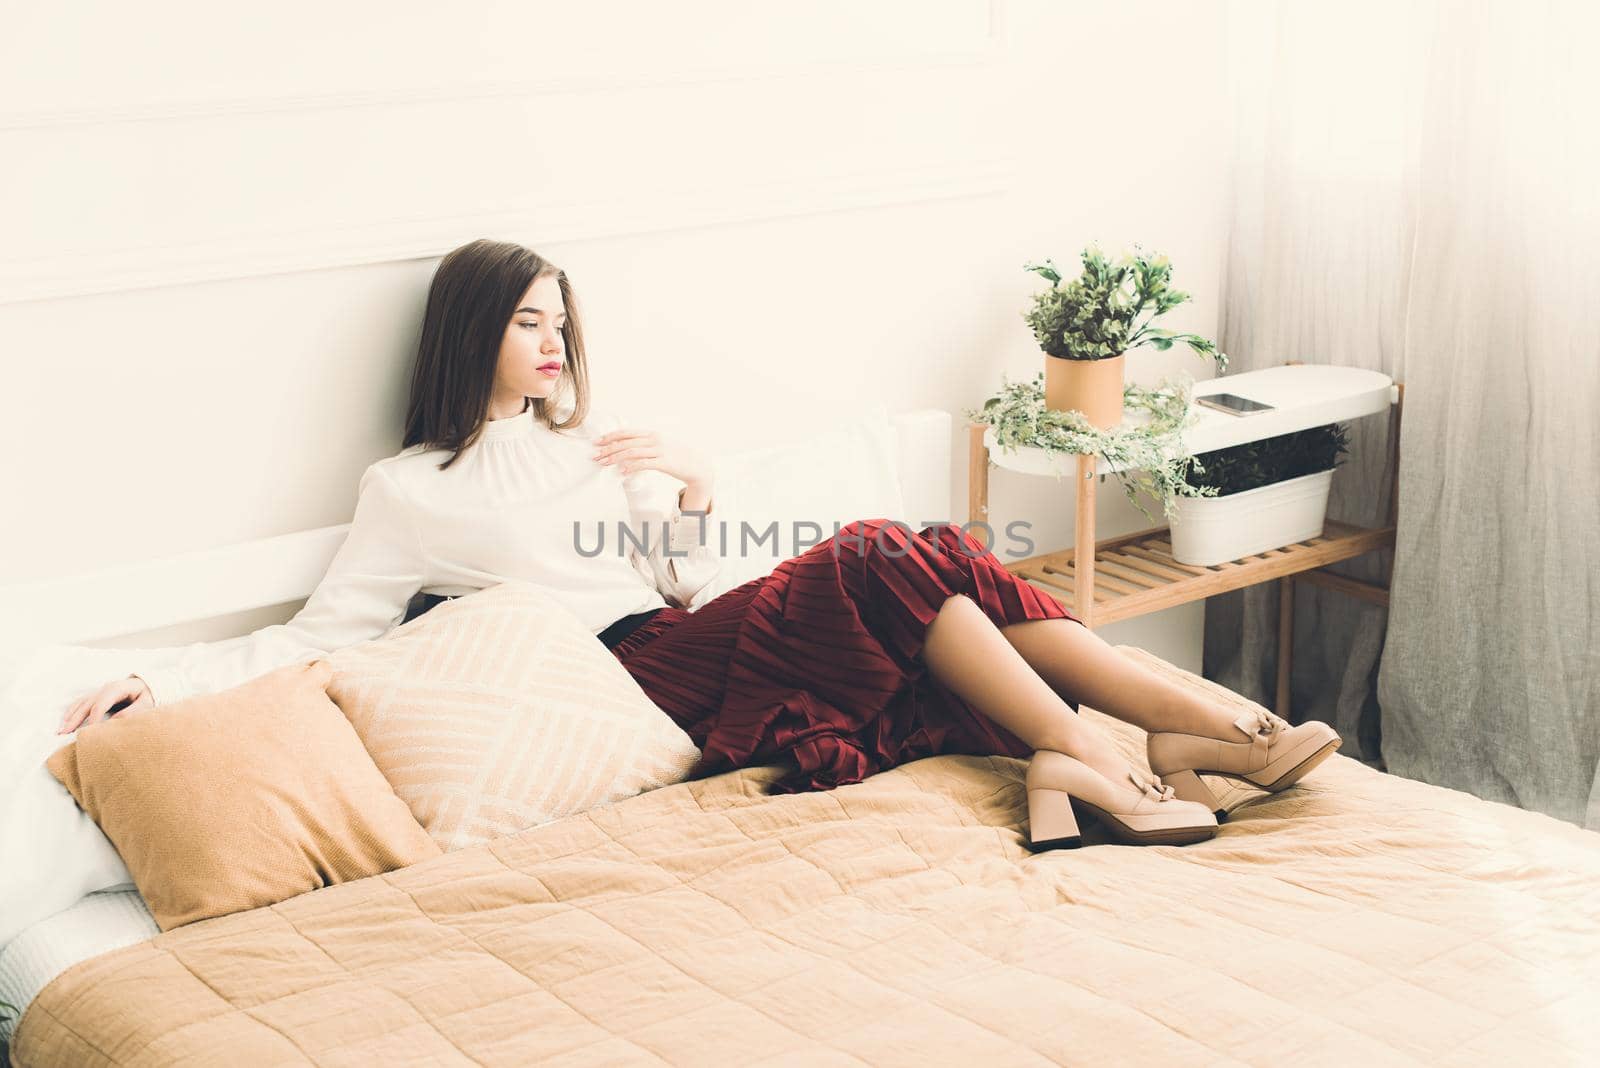 Portrait of fashionable women in red skirt, white blouse and stylish beige high-heeled shoes with a chain buckle posing in a bed by Ashtray25